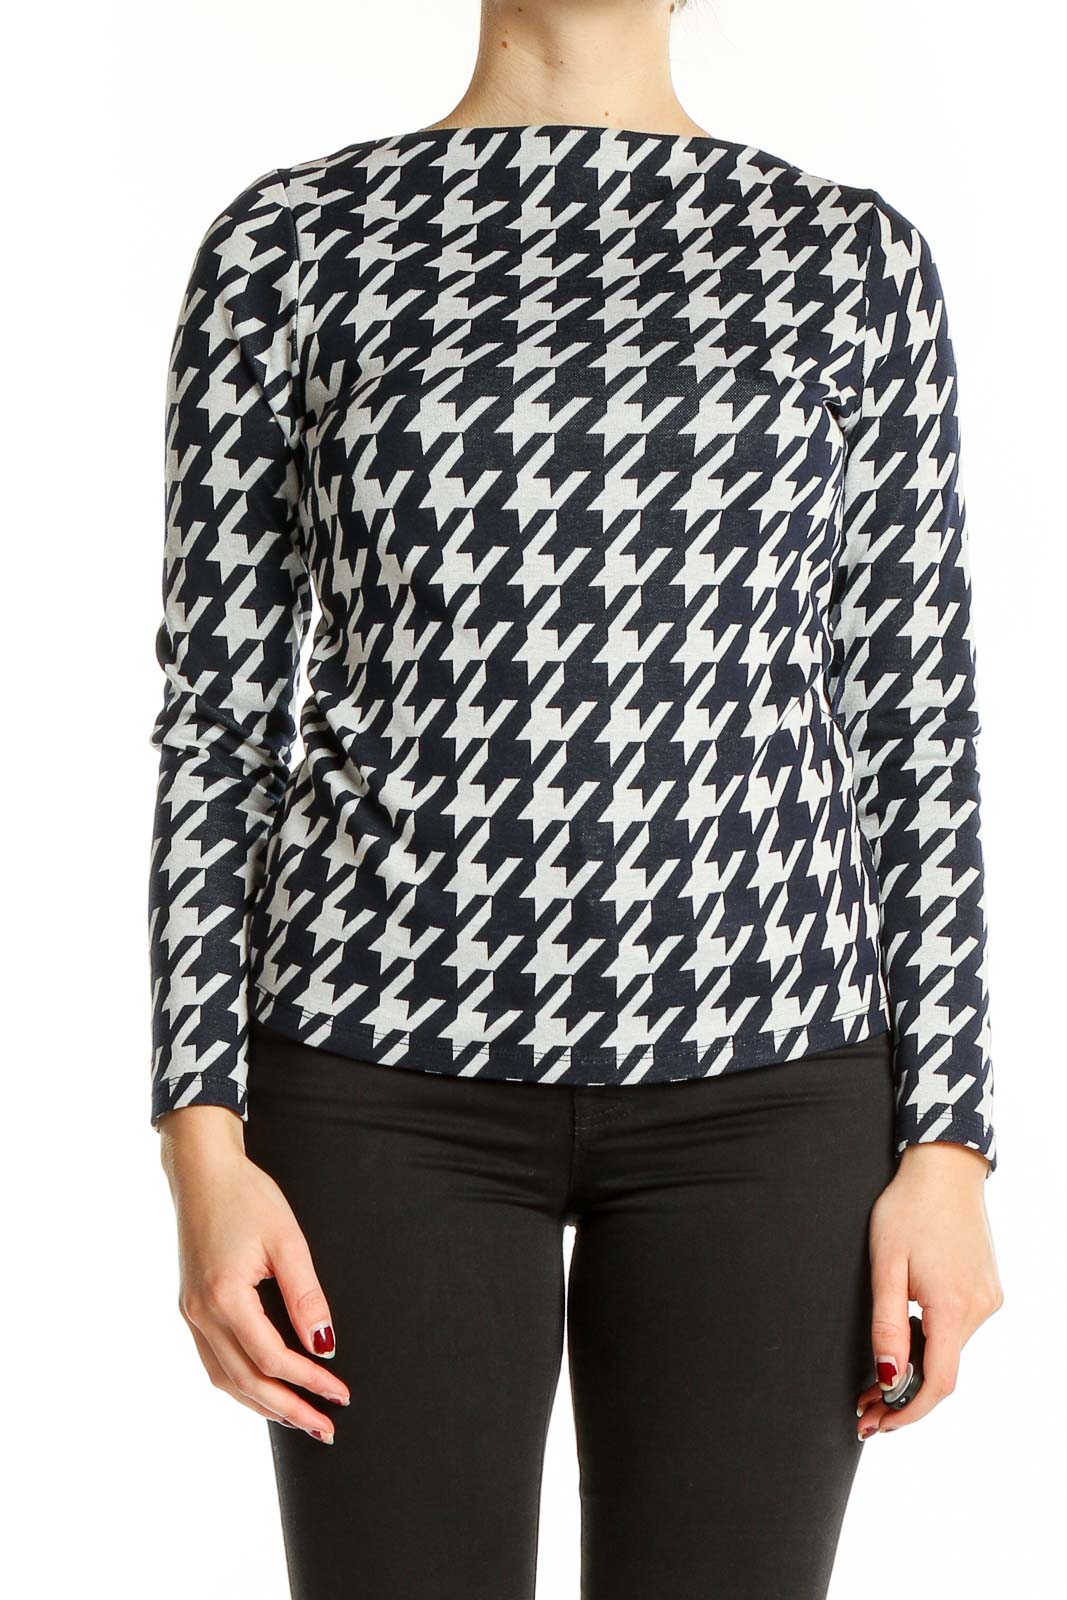 White Black Houndstooth Top Front